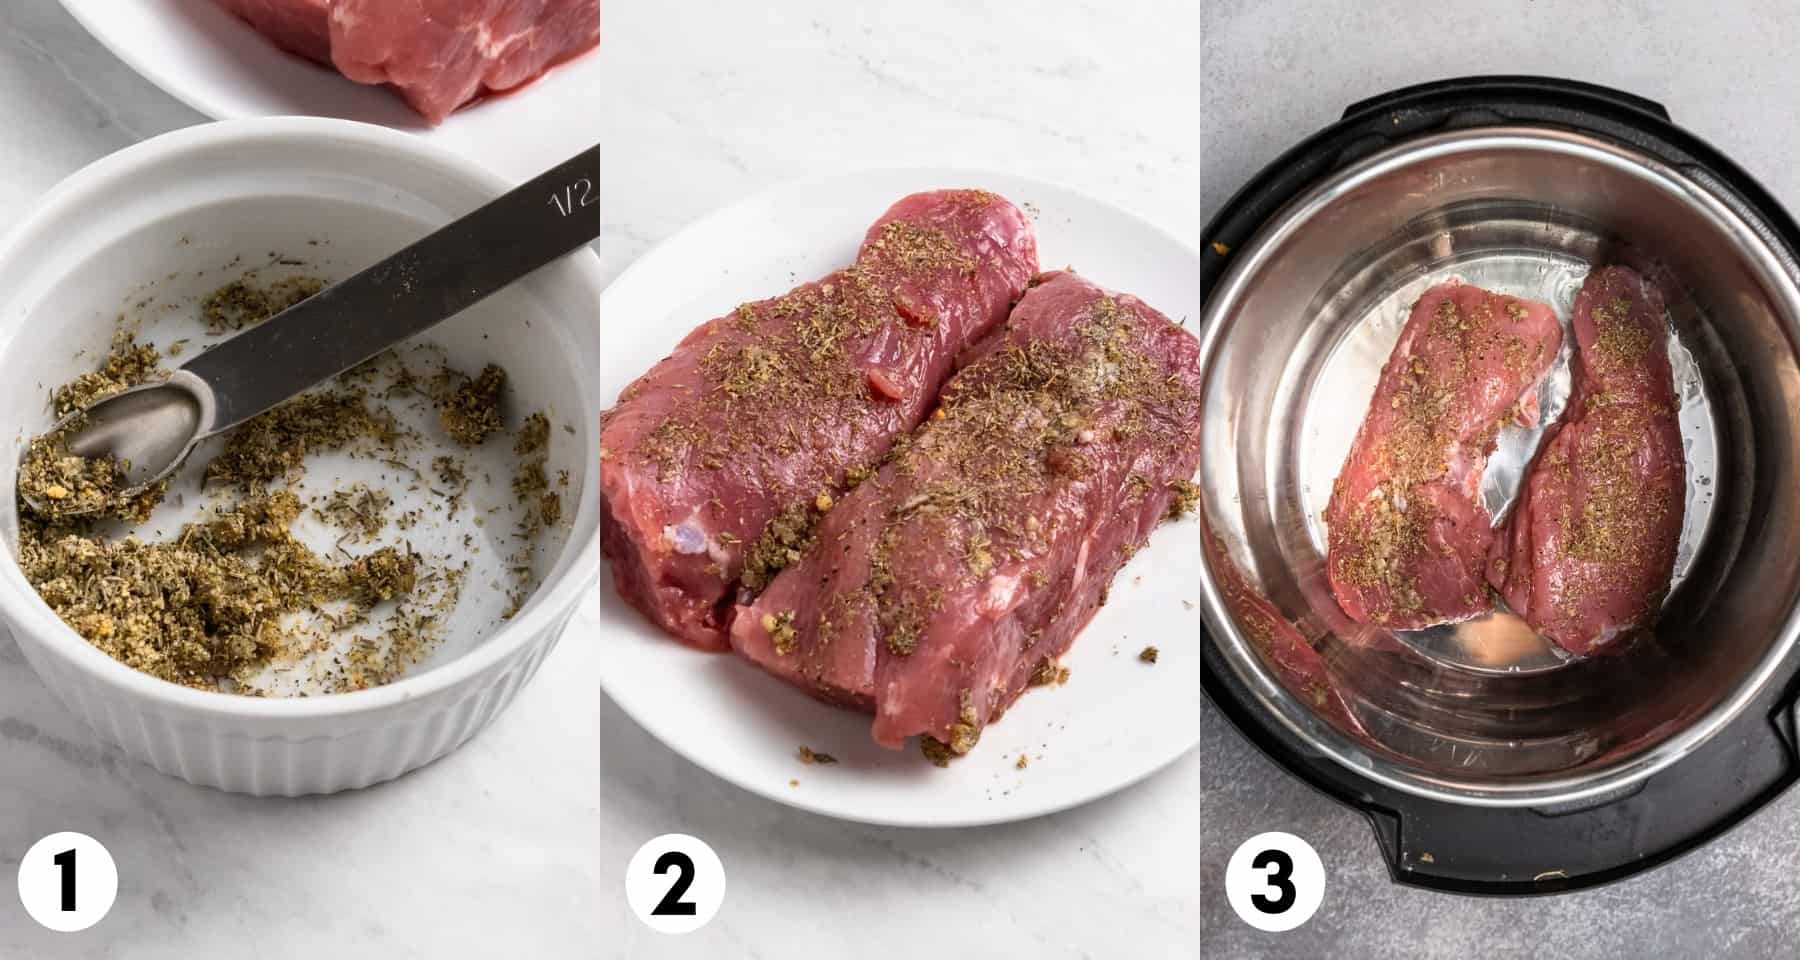 Seasonings and meat in Instant Pot.